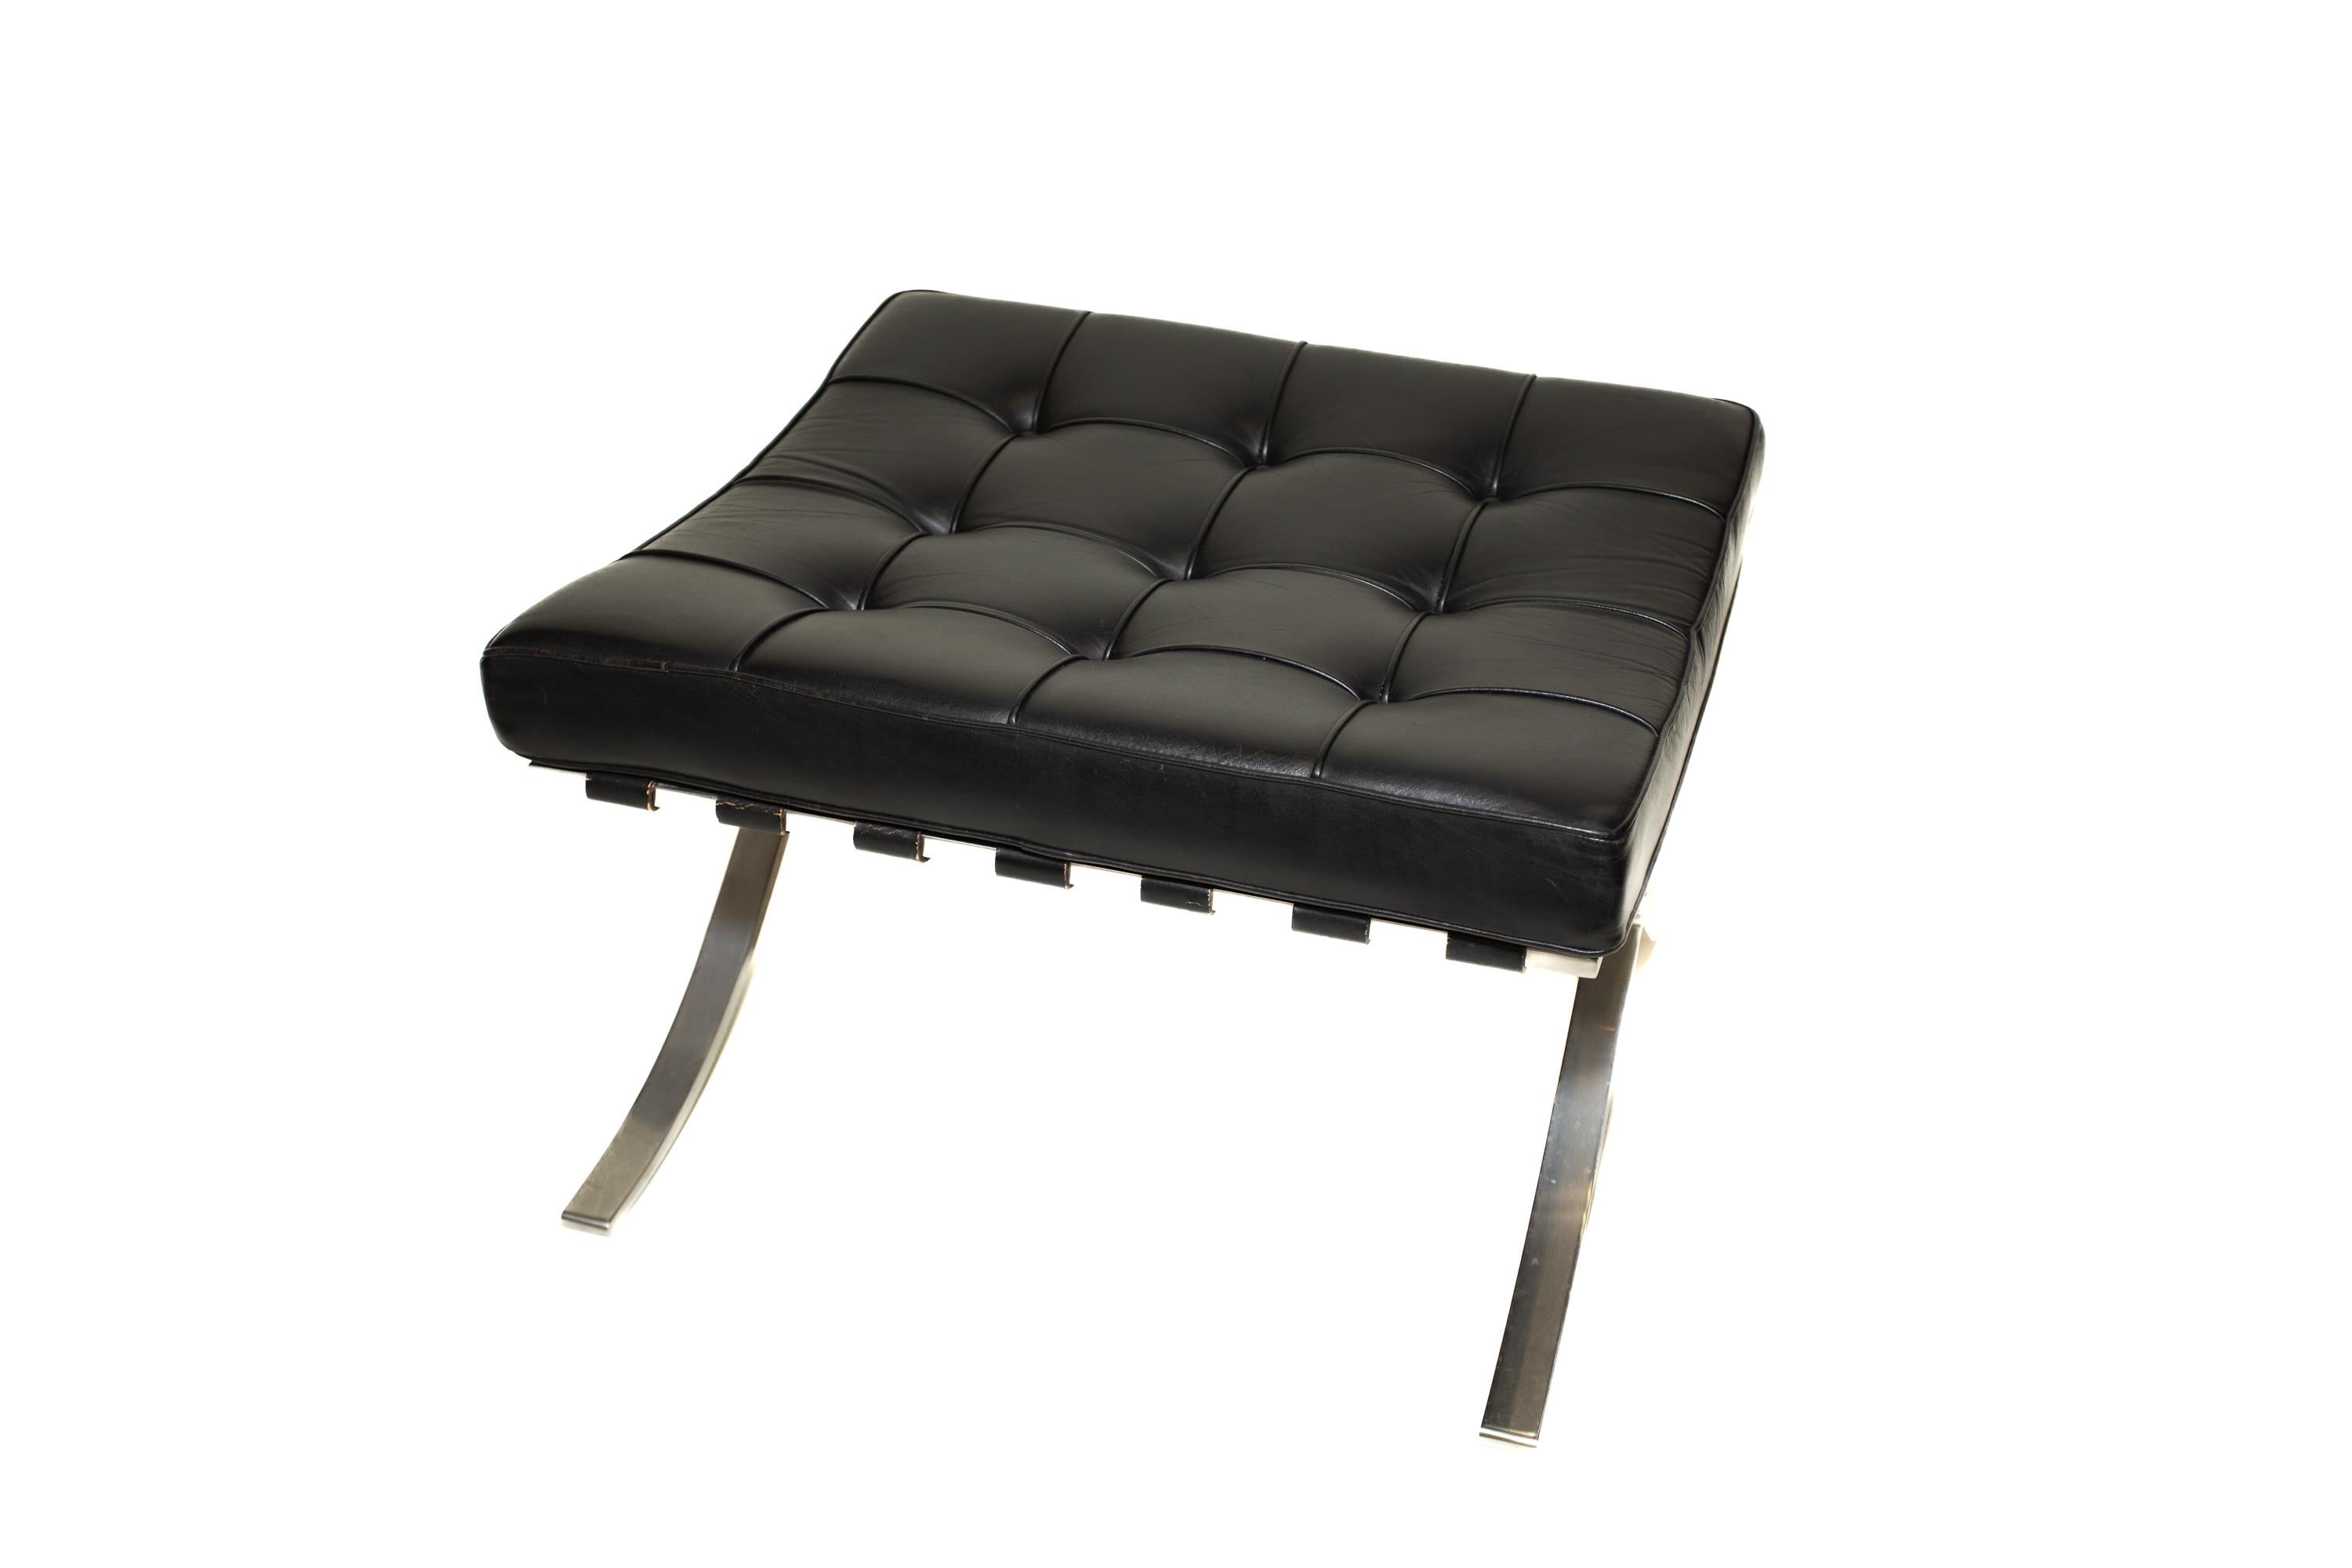 A Knoll Barcelona ottoman
Polished stainless steel
Original clean black leather
Early Park Ave Label.